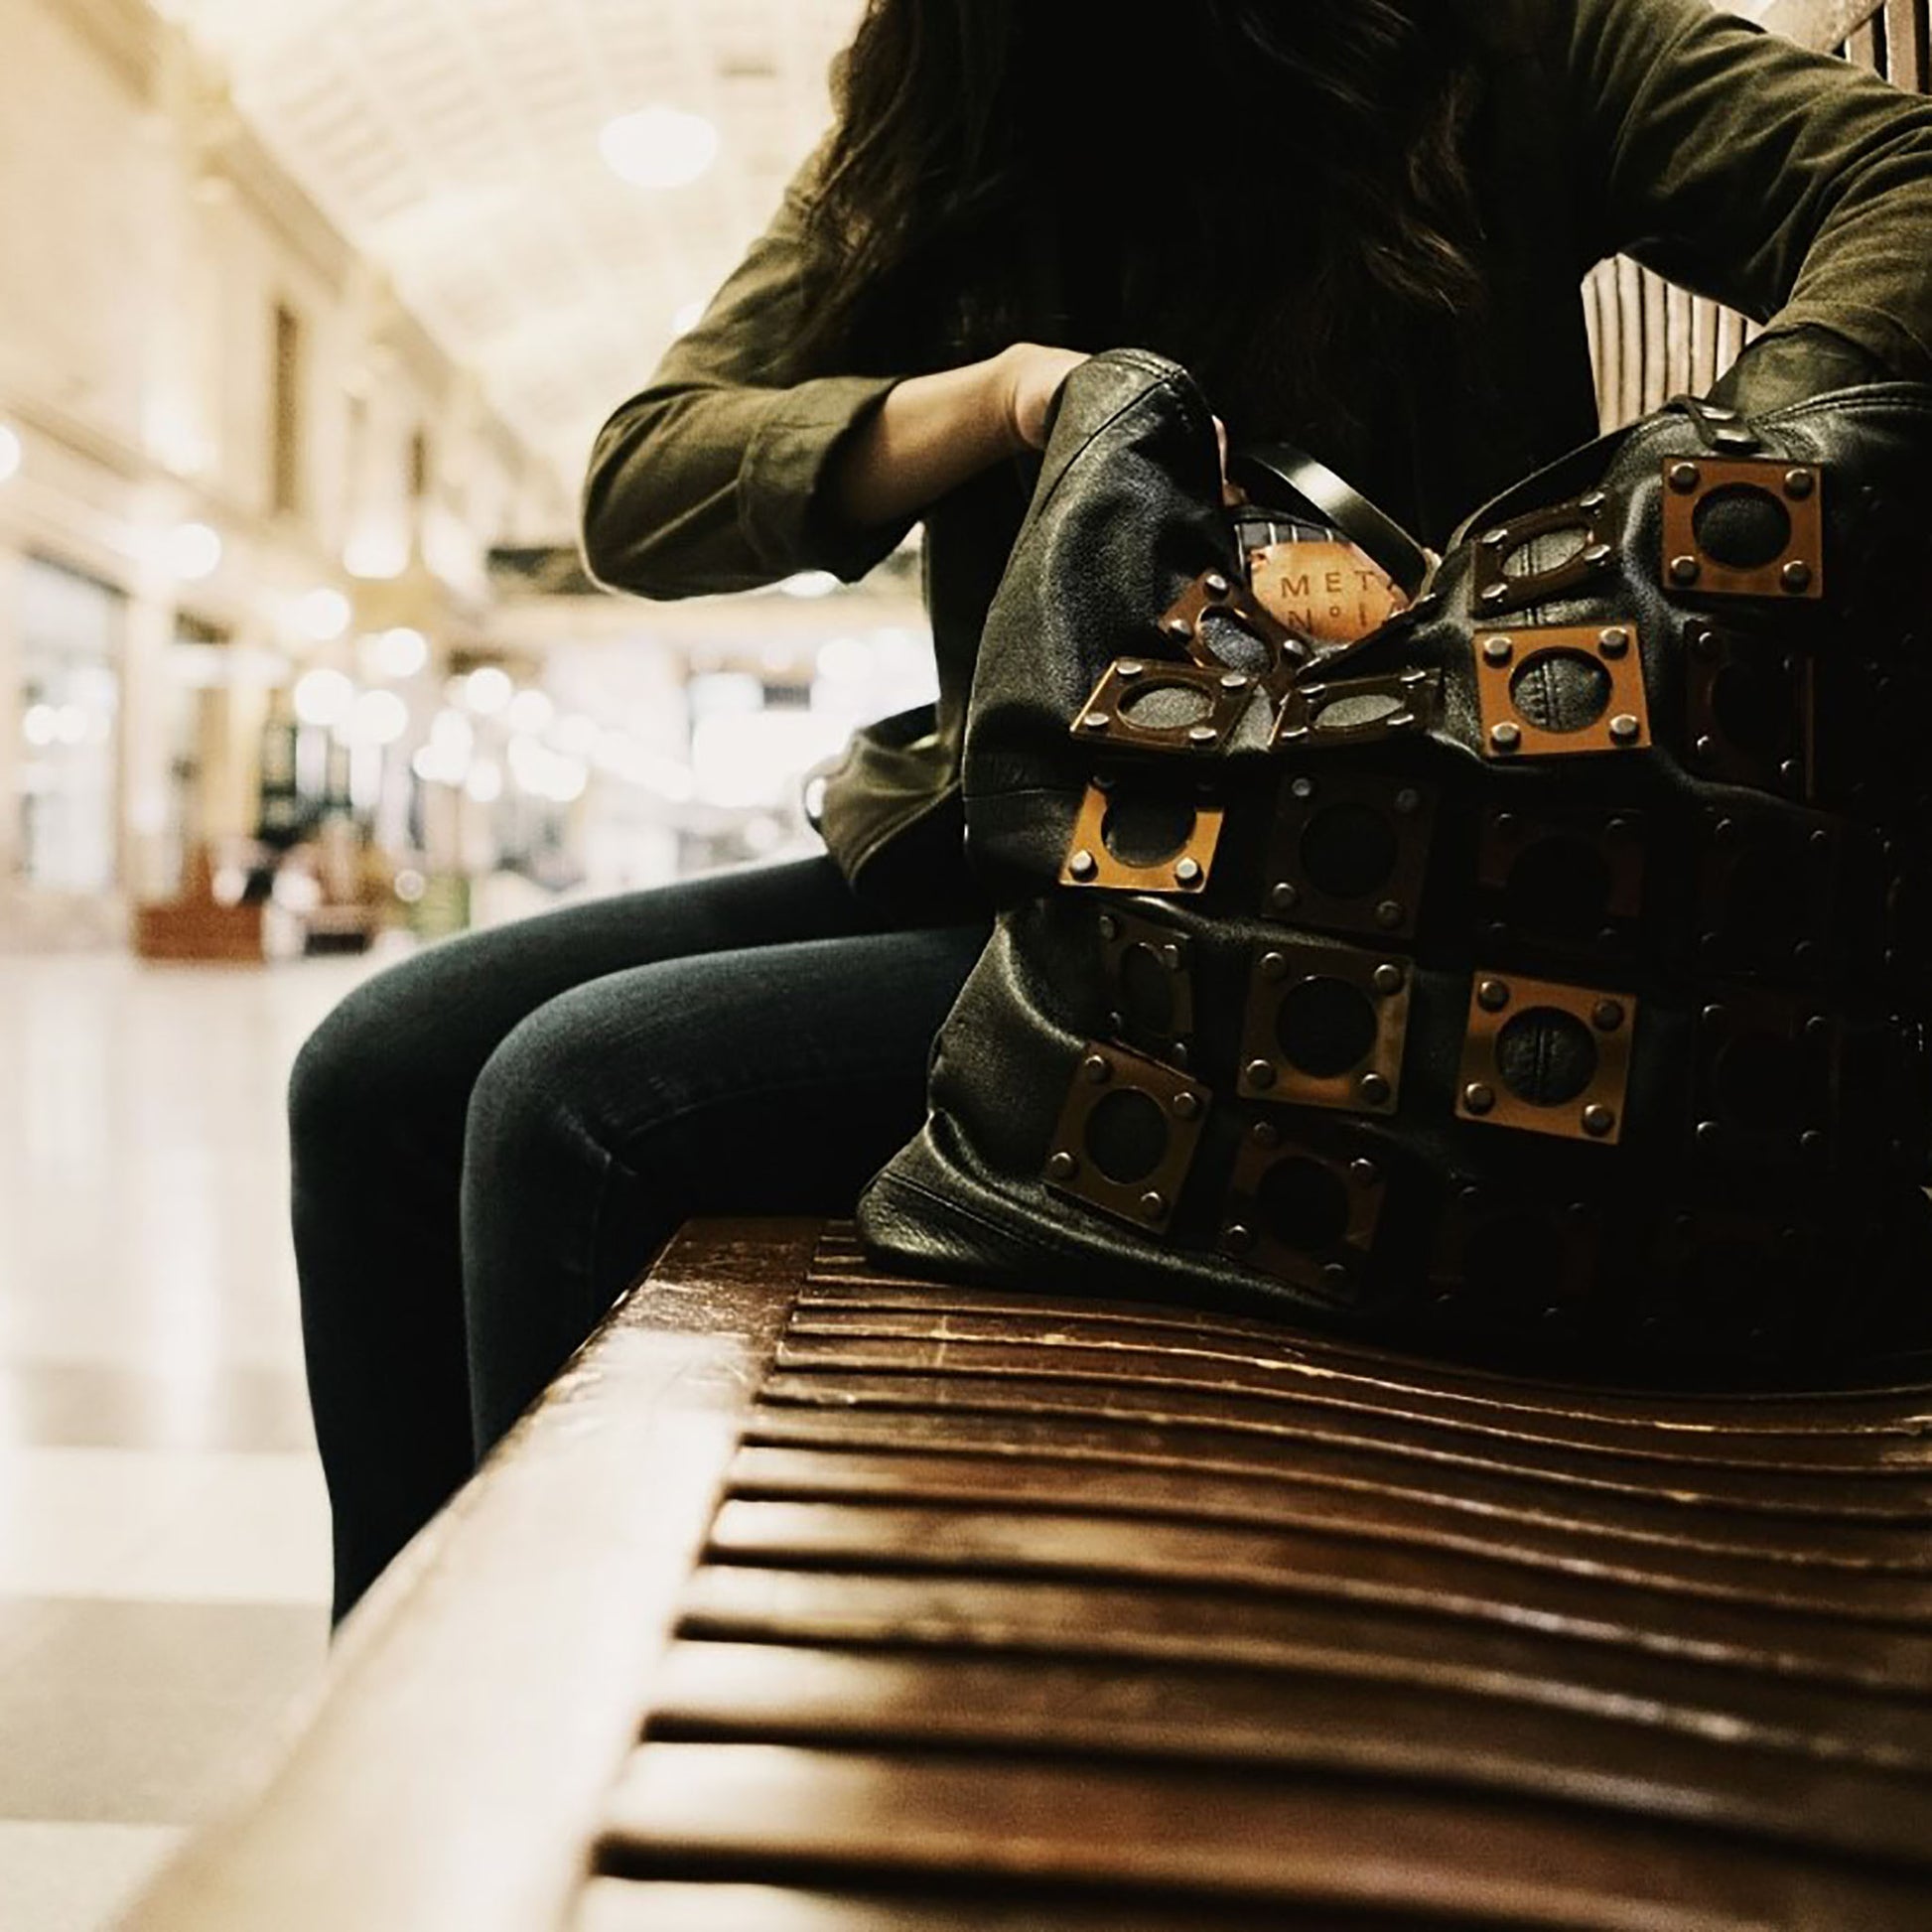 METANoIA black recycled leather tote handbag with square and hollowed circle copper acrylic forms fashioned into a repeative fashion. Model seated on train station bench reaching into the tote bag.